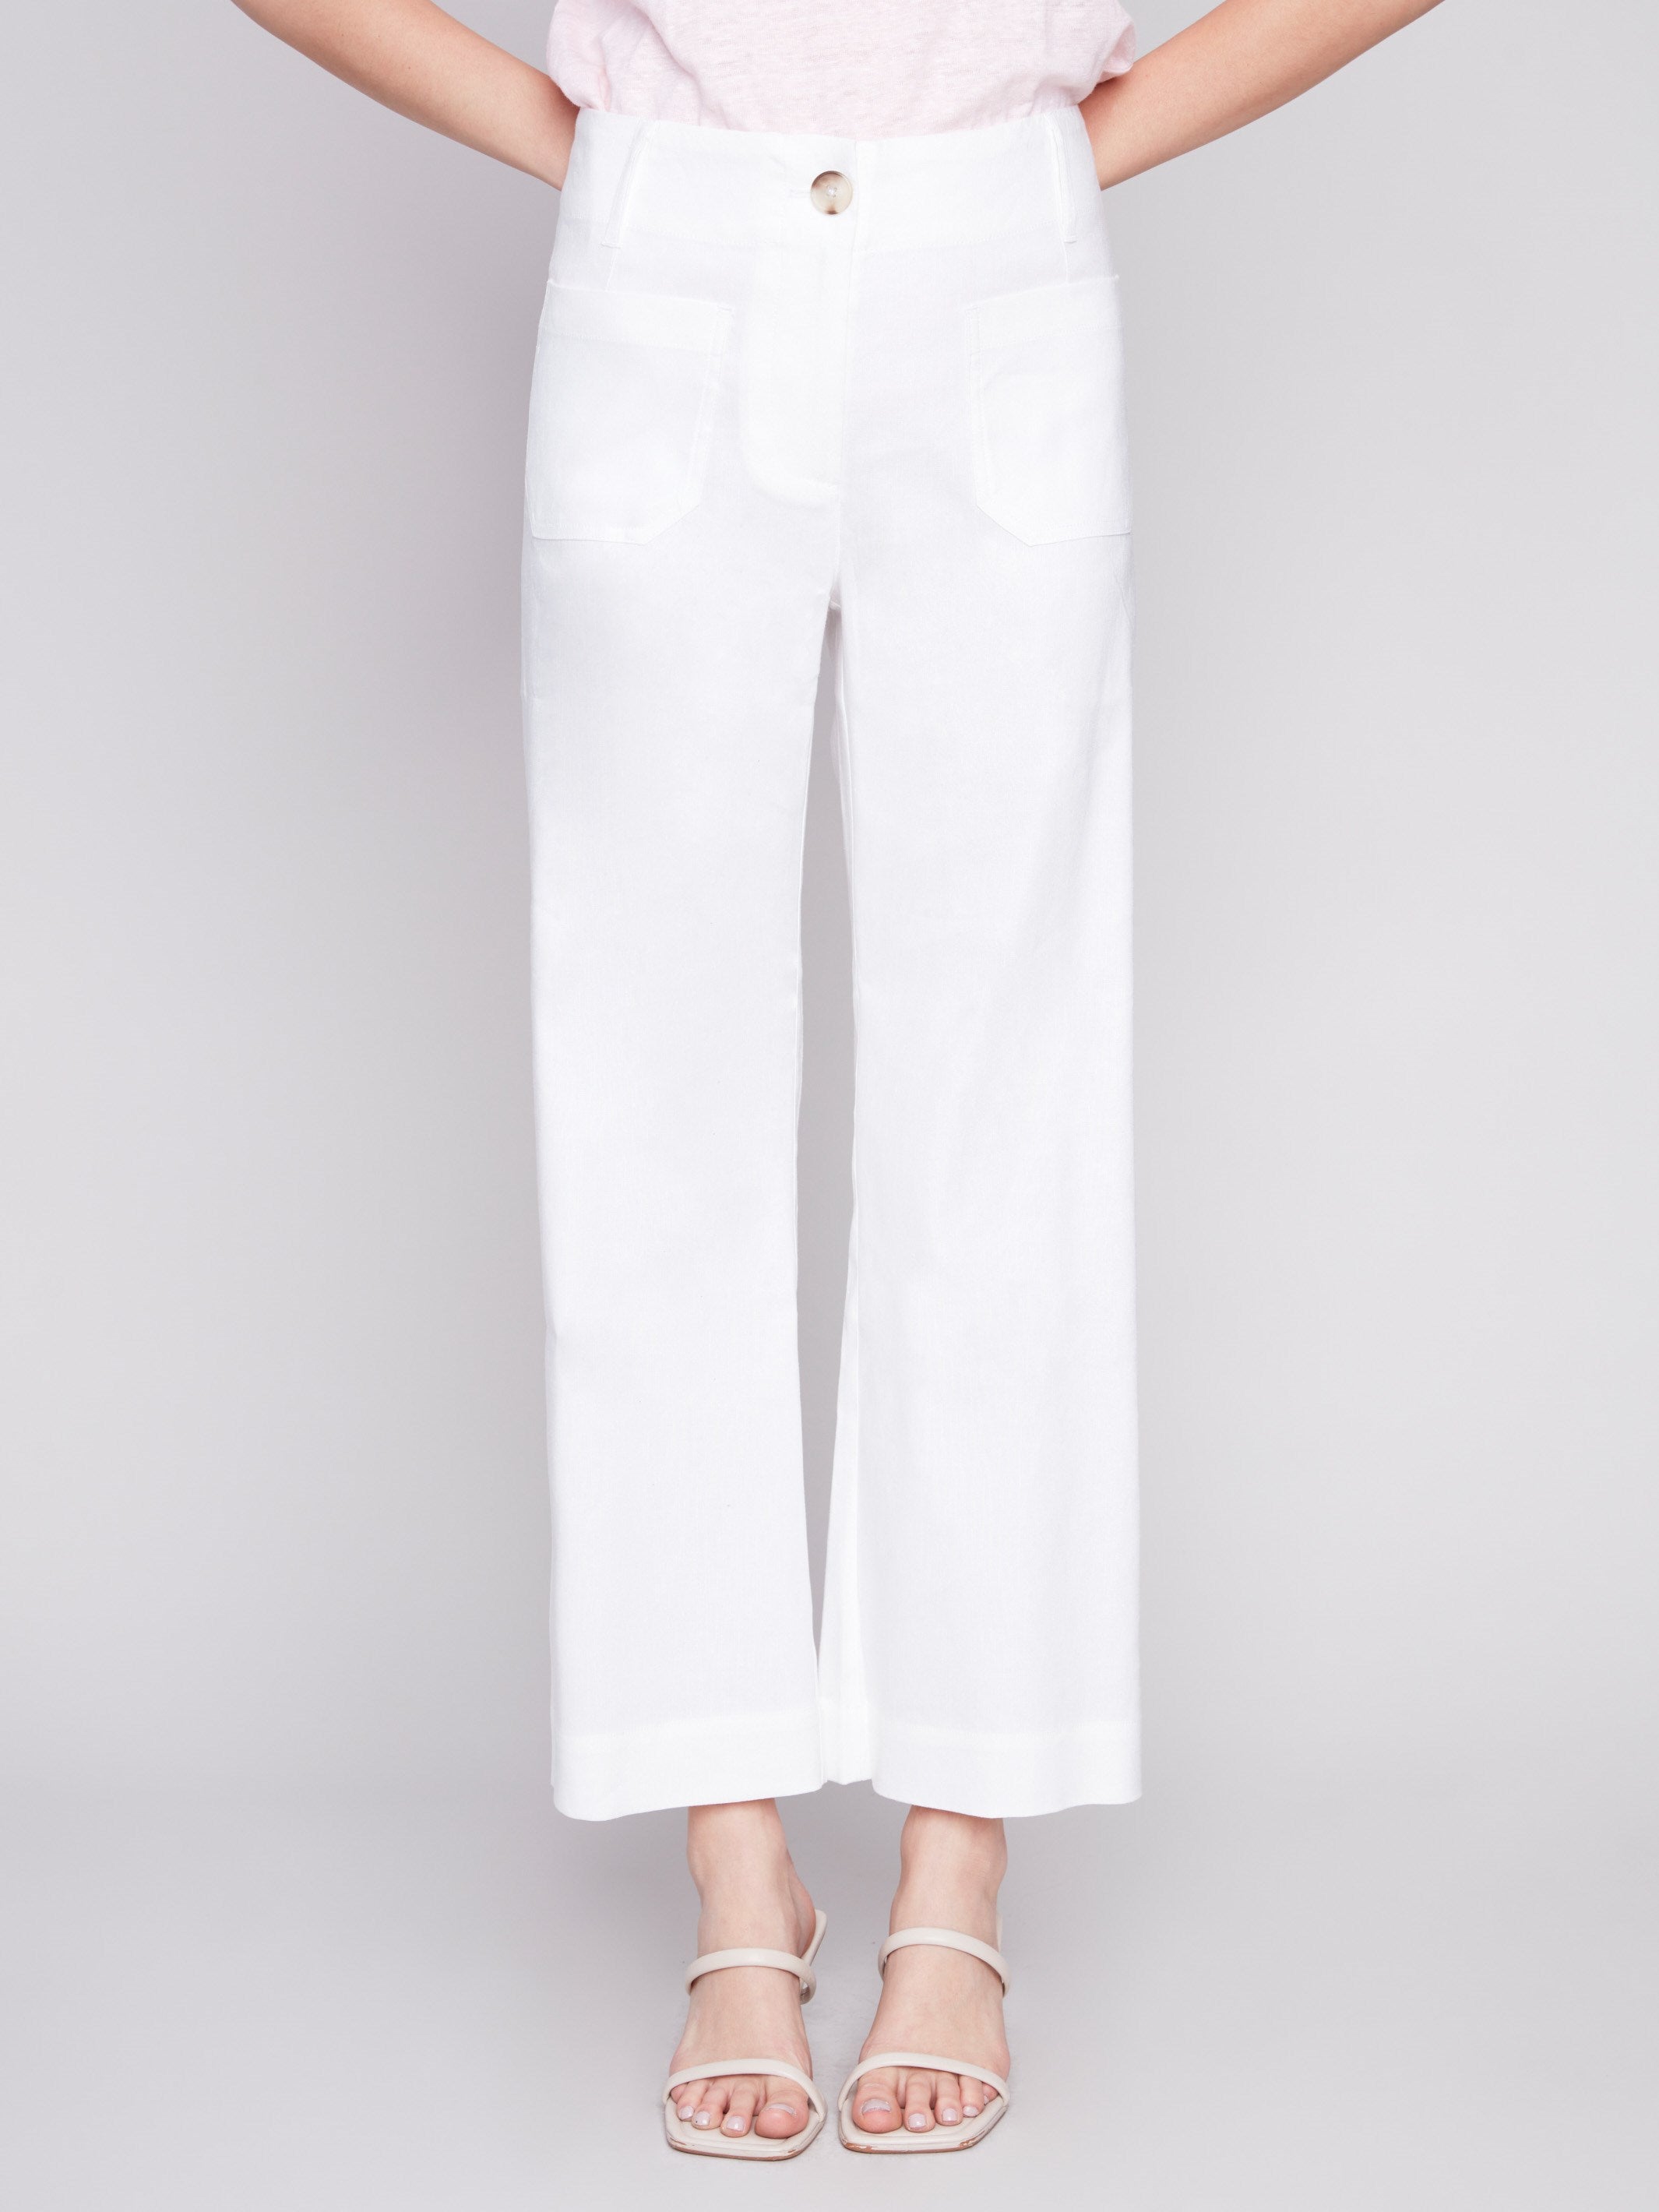 Charlie B Cropped Linen Blend Pants - White - Image 7